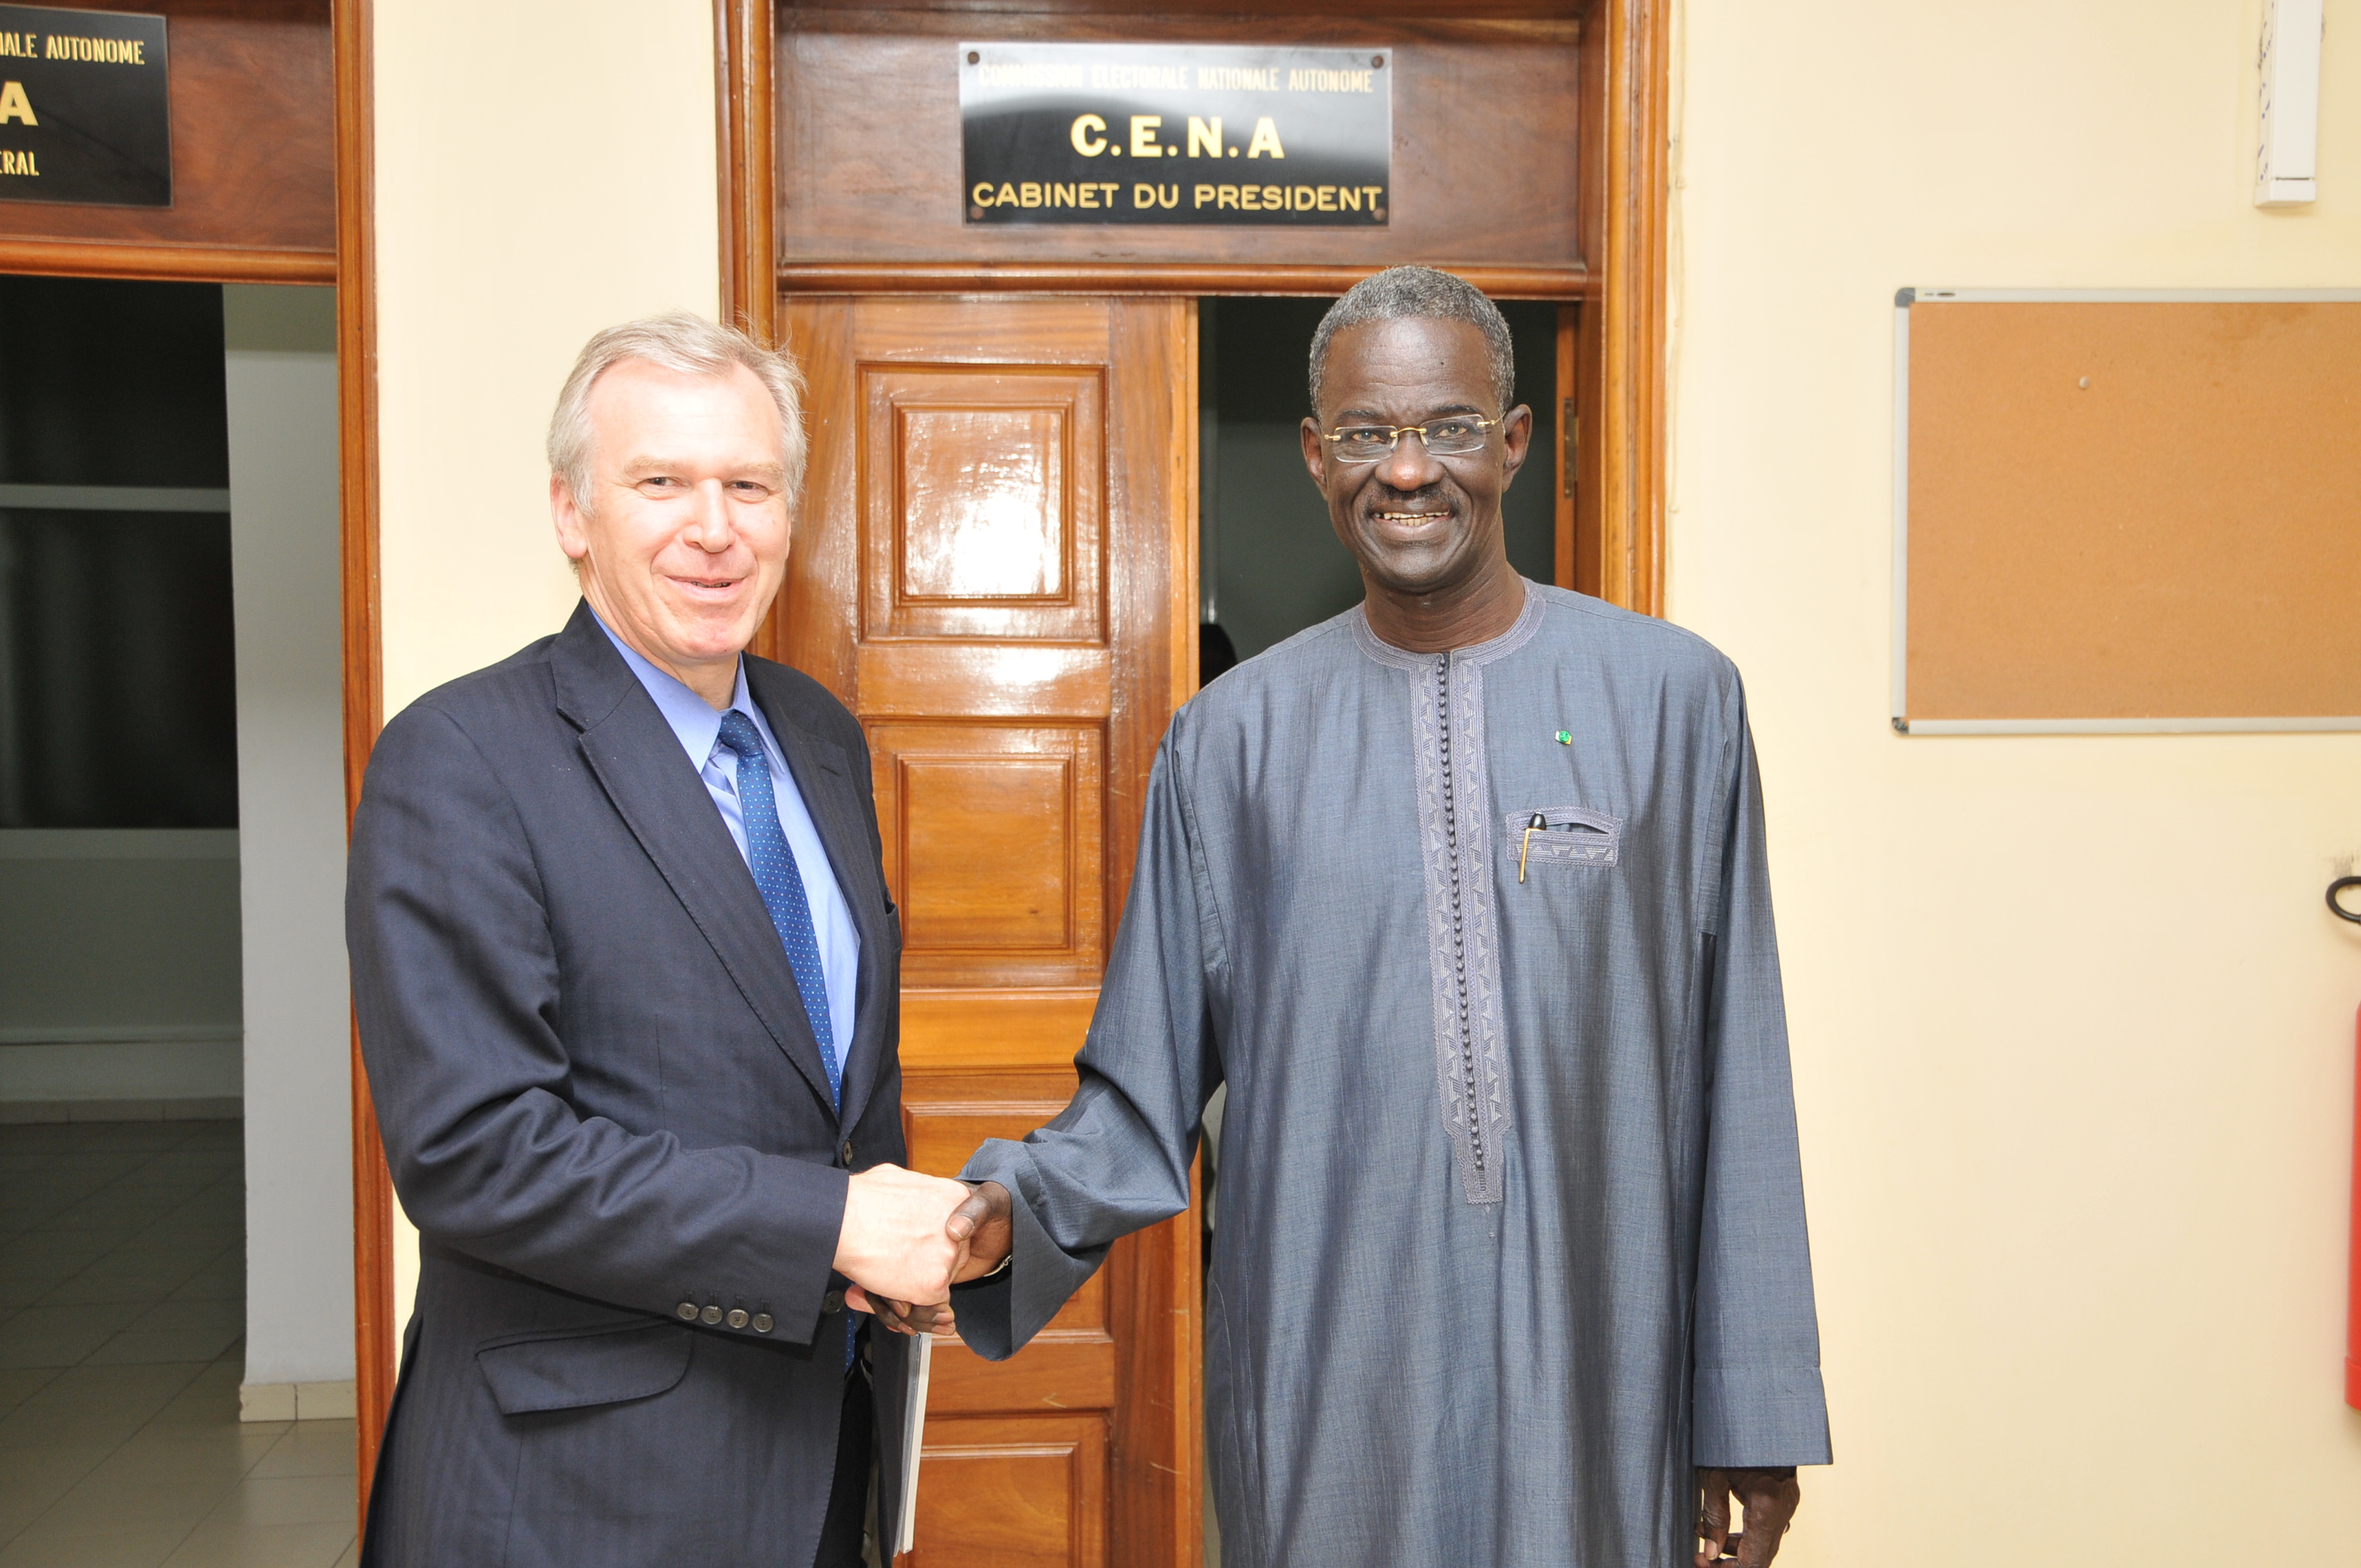 Yves Leterme with the Chairperson of the Autonomous National Electoral Commission of Senegal, Doudou Ndir.